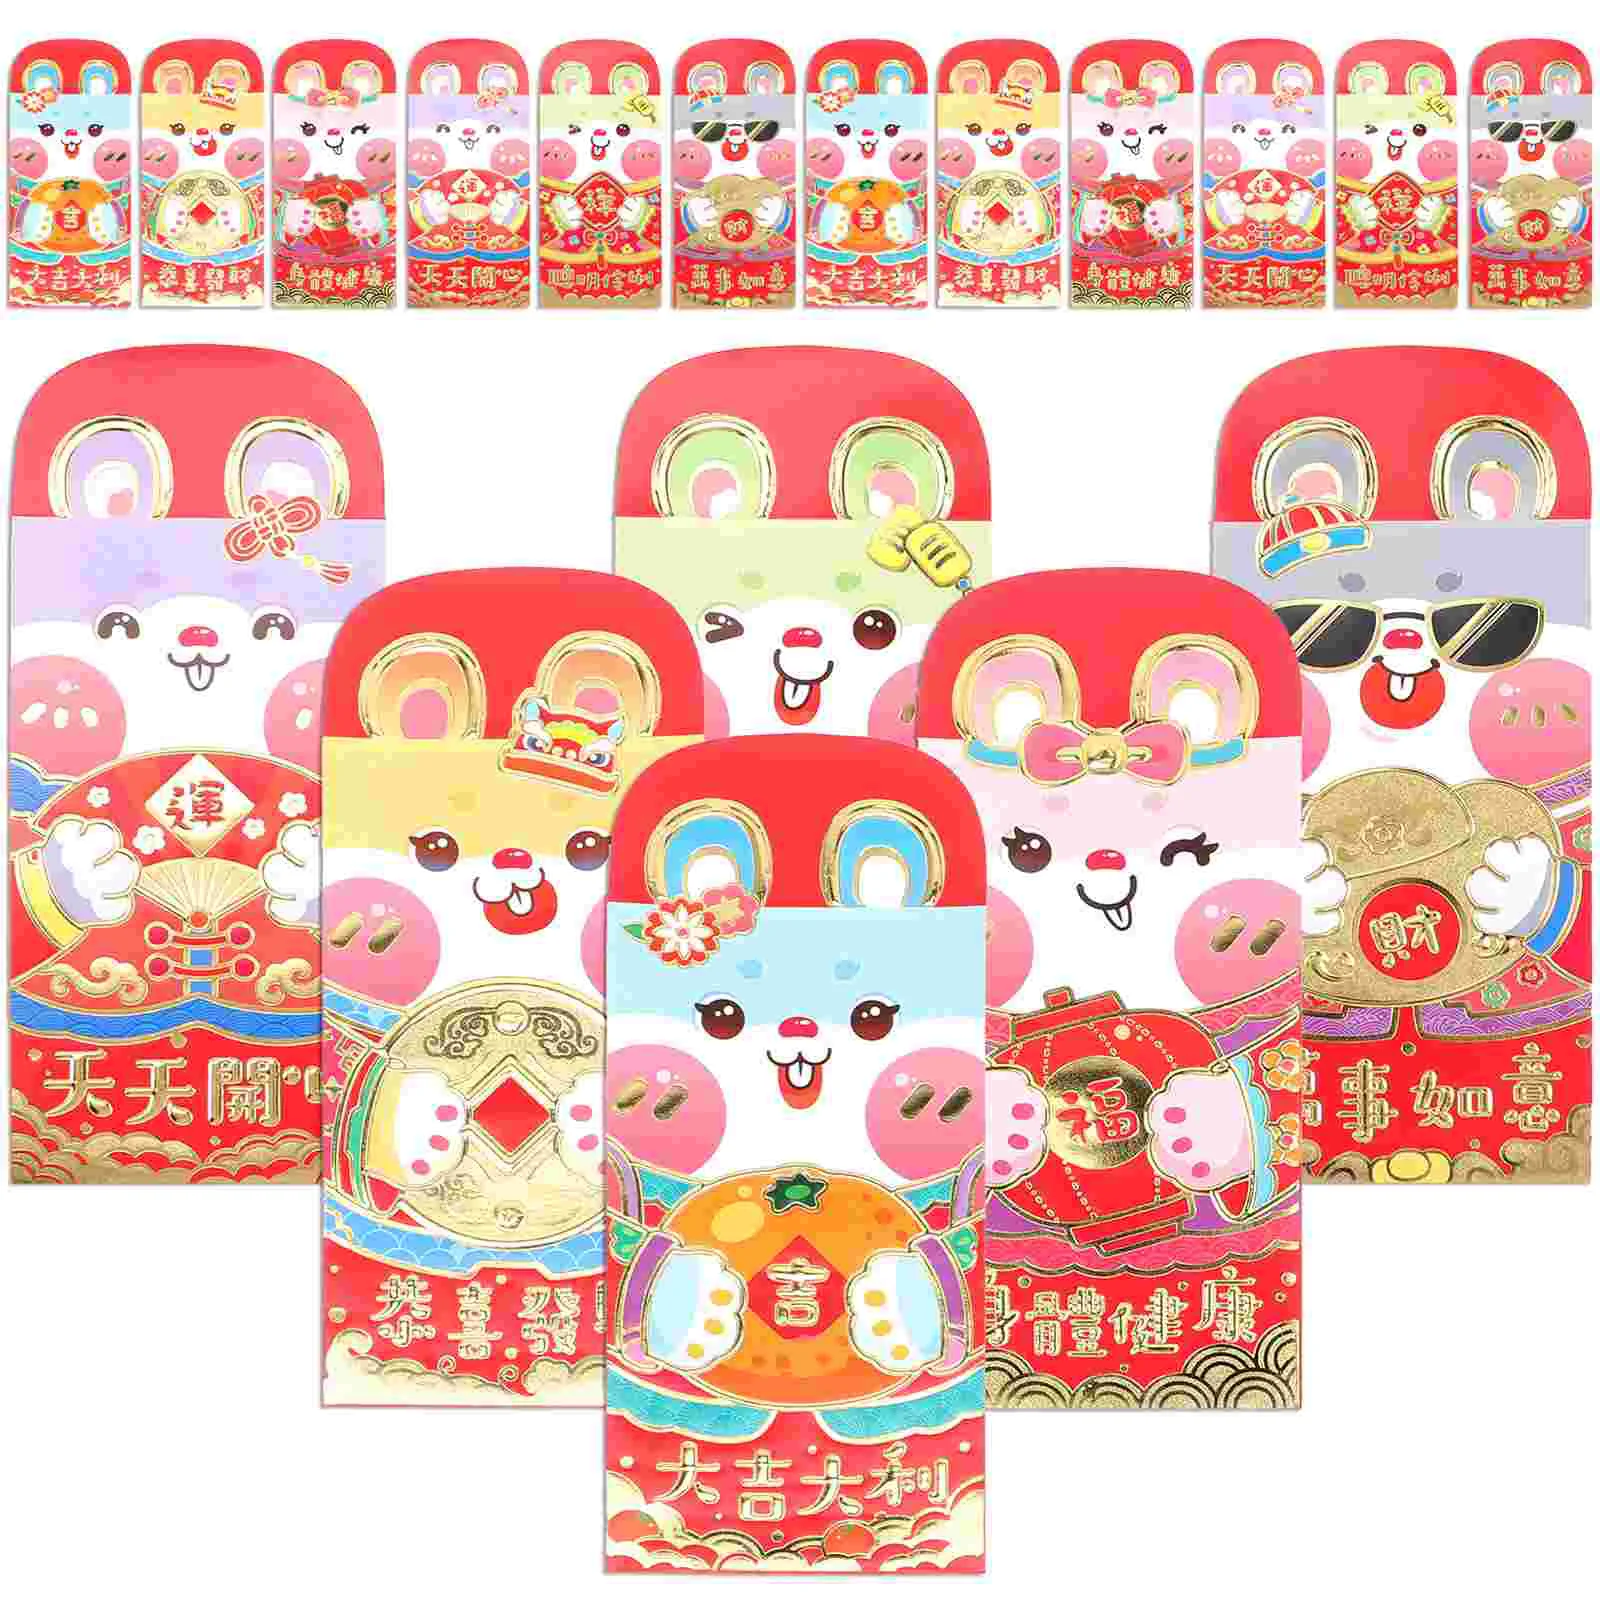 

Red Year New Envelopes Chinese Envelope Money Packet Packets Rabbit Lucky Bag Gift Eve Years Spring Pocket Wedding Festival Bao